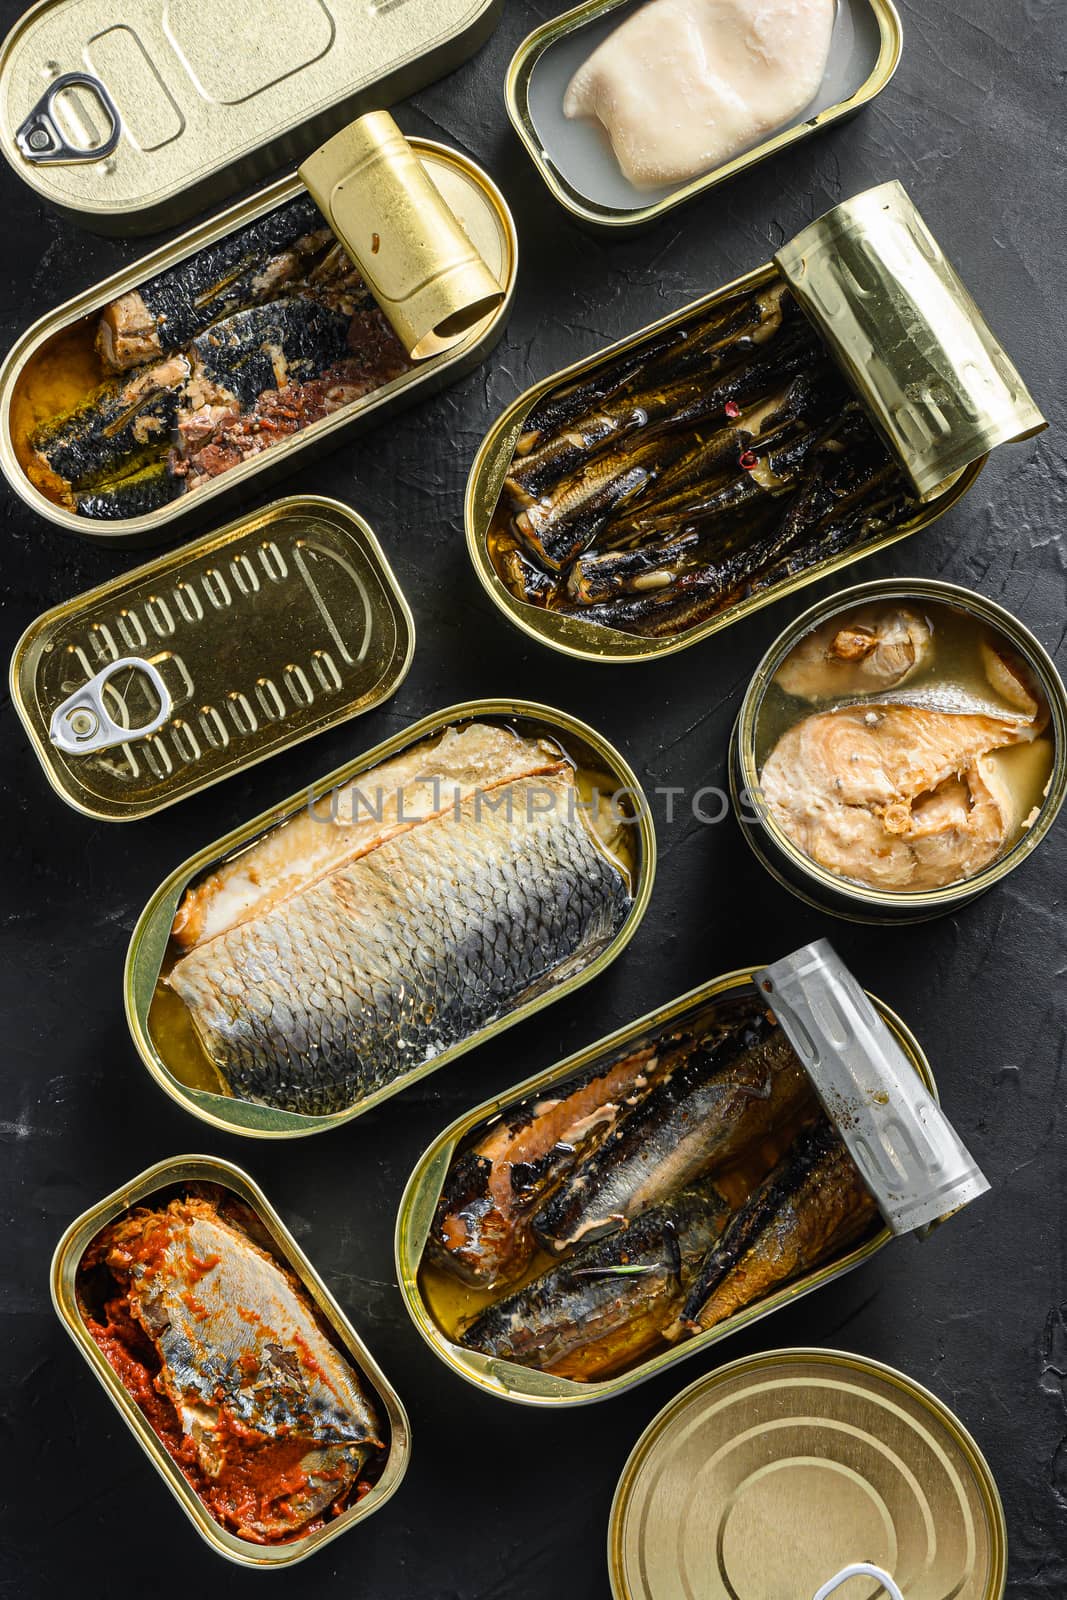 Saury, mackerel, sprats, sardines, pilchard, squid, tuna, Canned fish in tin cans. Open and closed over black slate background top view by Ilianesolenyi